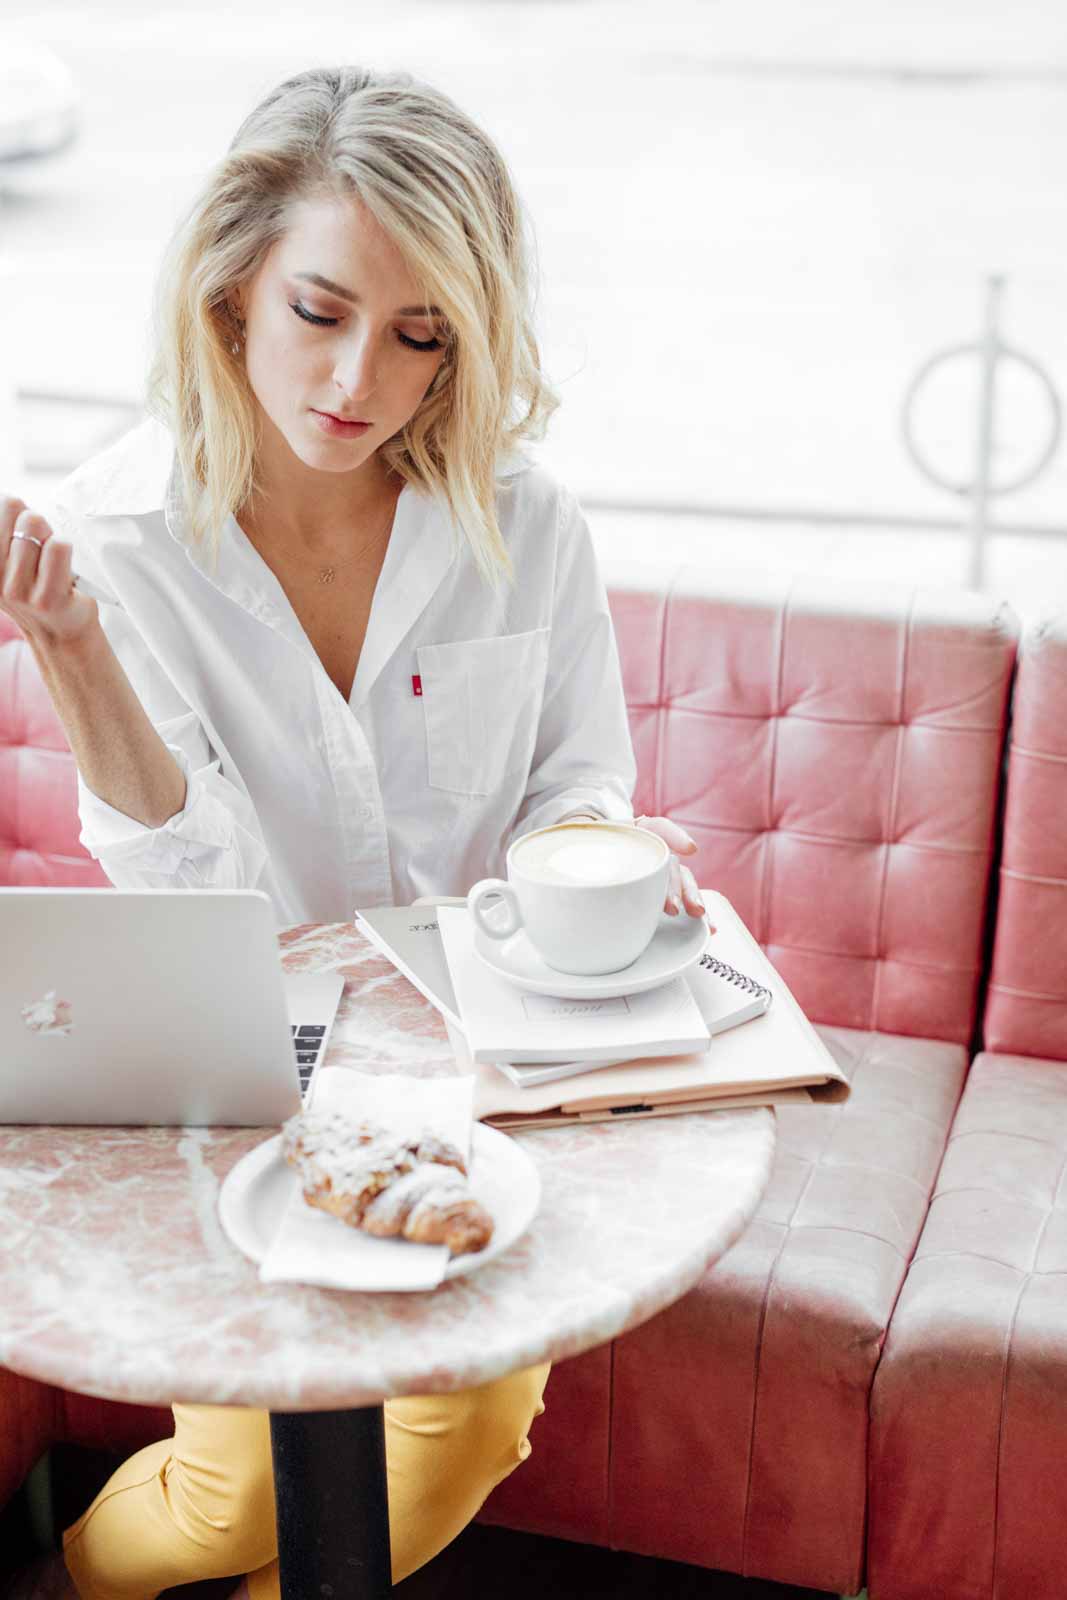 5 Steps You Can Take To Monetize Your Brand Right Now, as told by a blogger, influencer, and small-business owner! Why not make money if your brand if you can? Here's how!